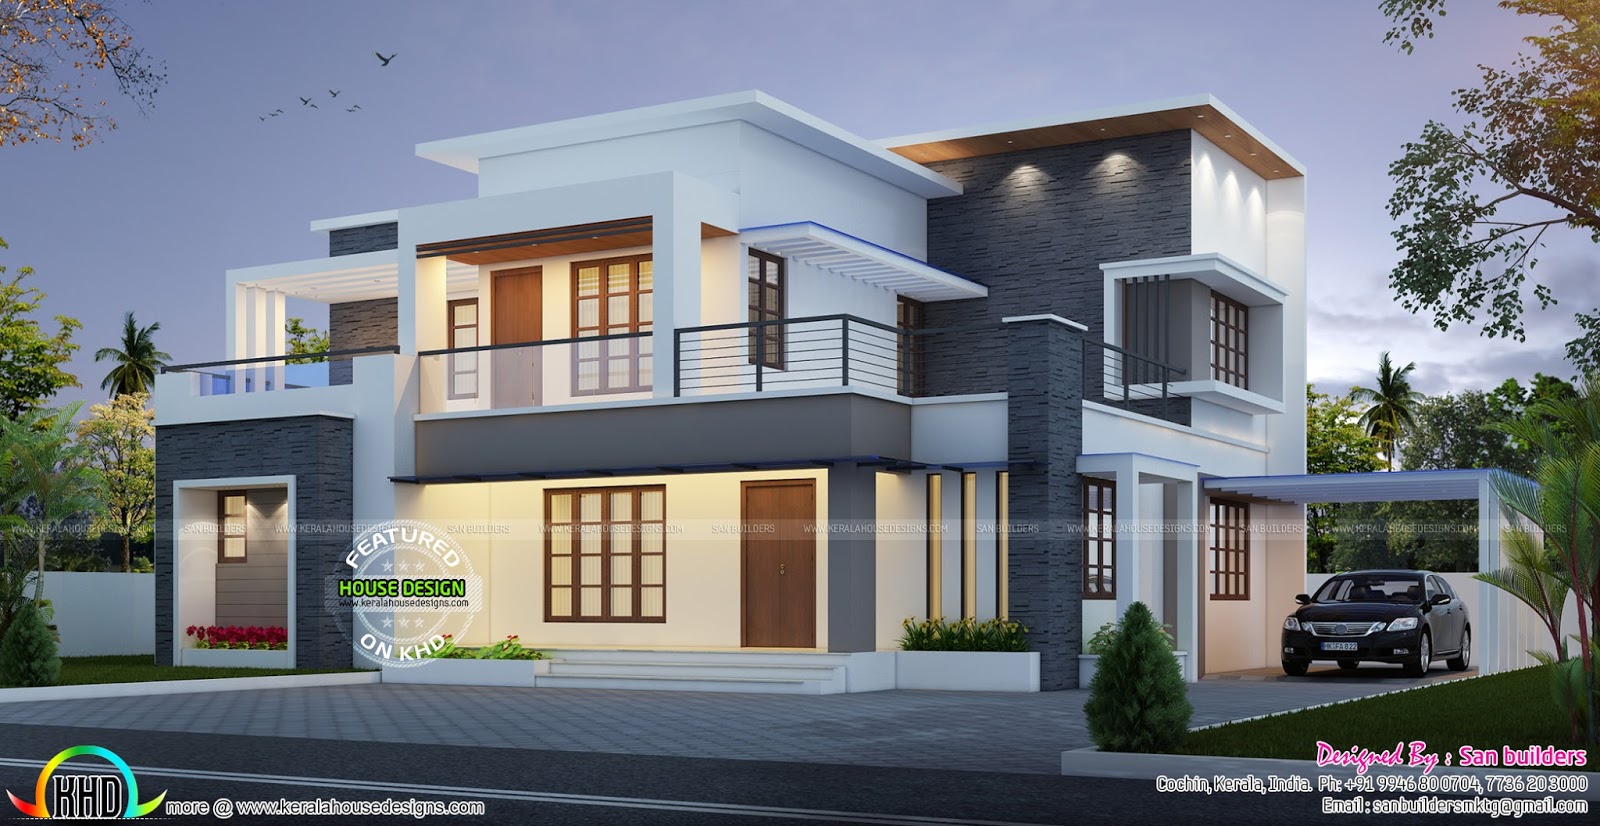 House Plan And Elevation By San Builders Kerala Home Design